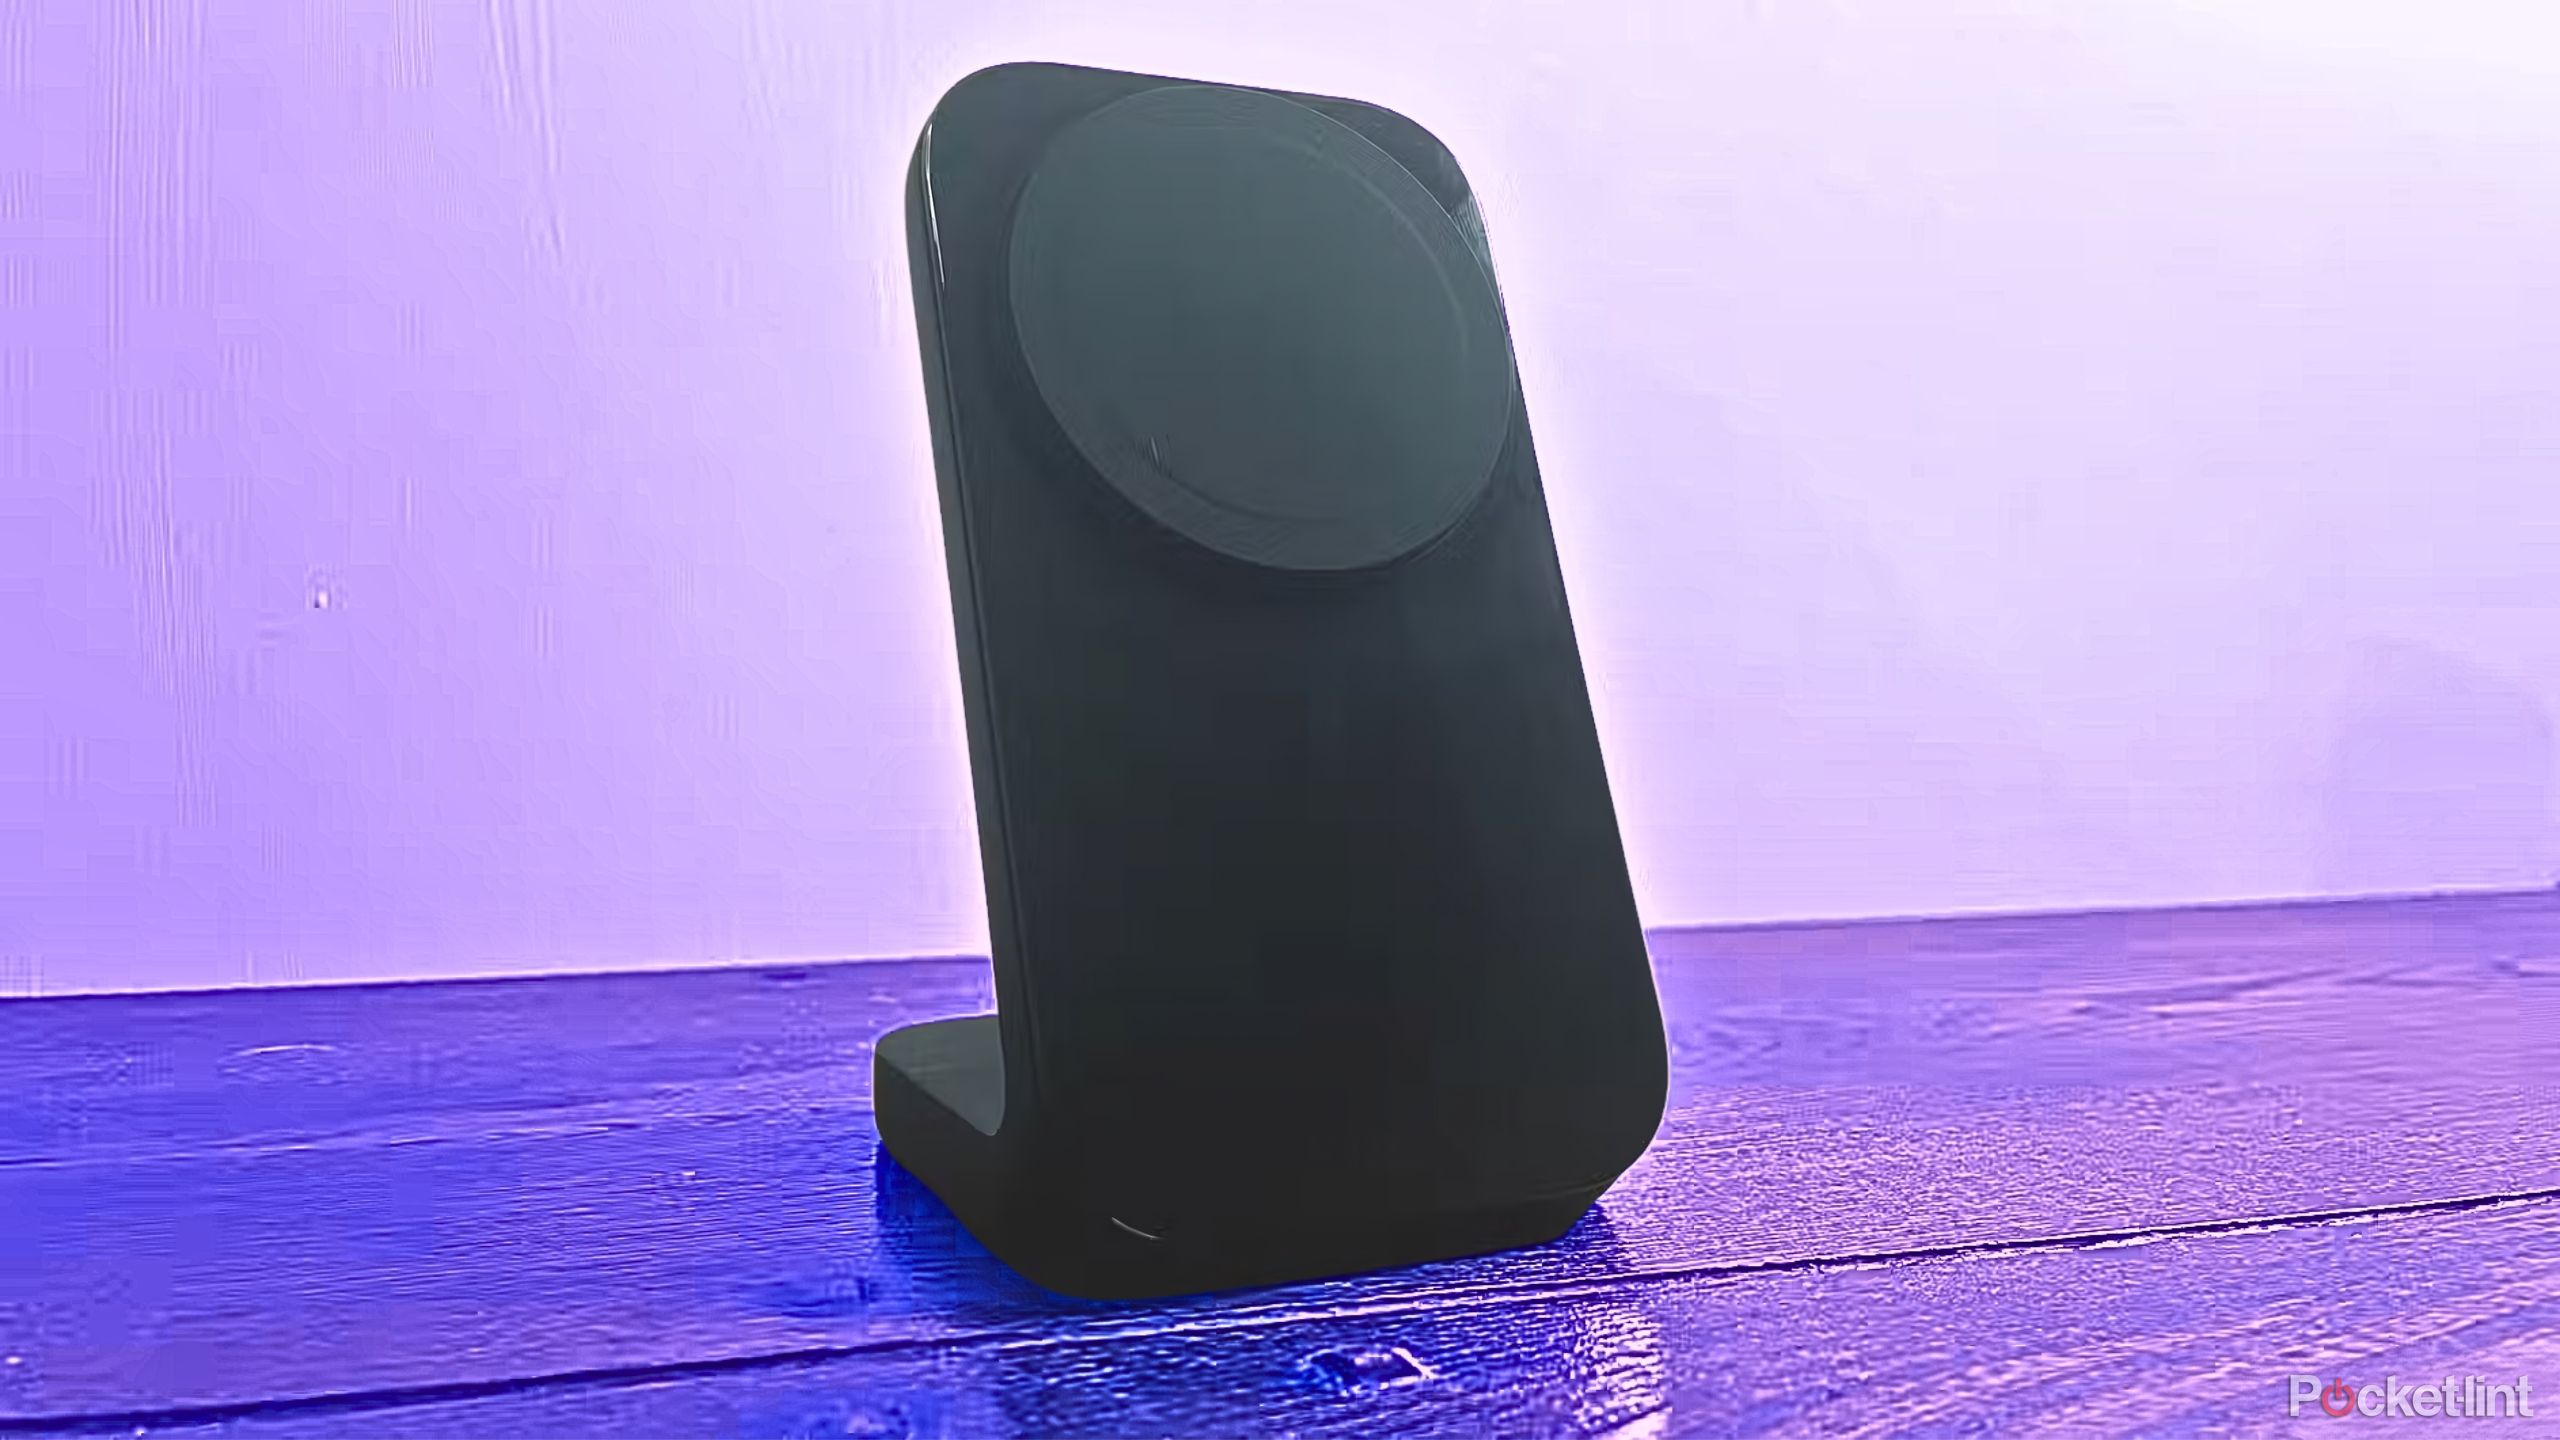 nomad-qi2-wireless-charging-stand-2 on purple background